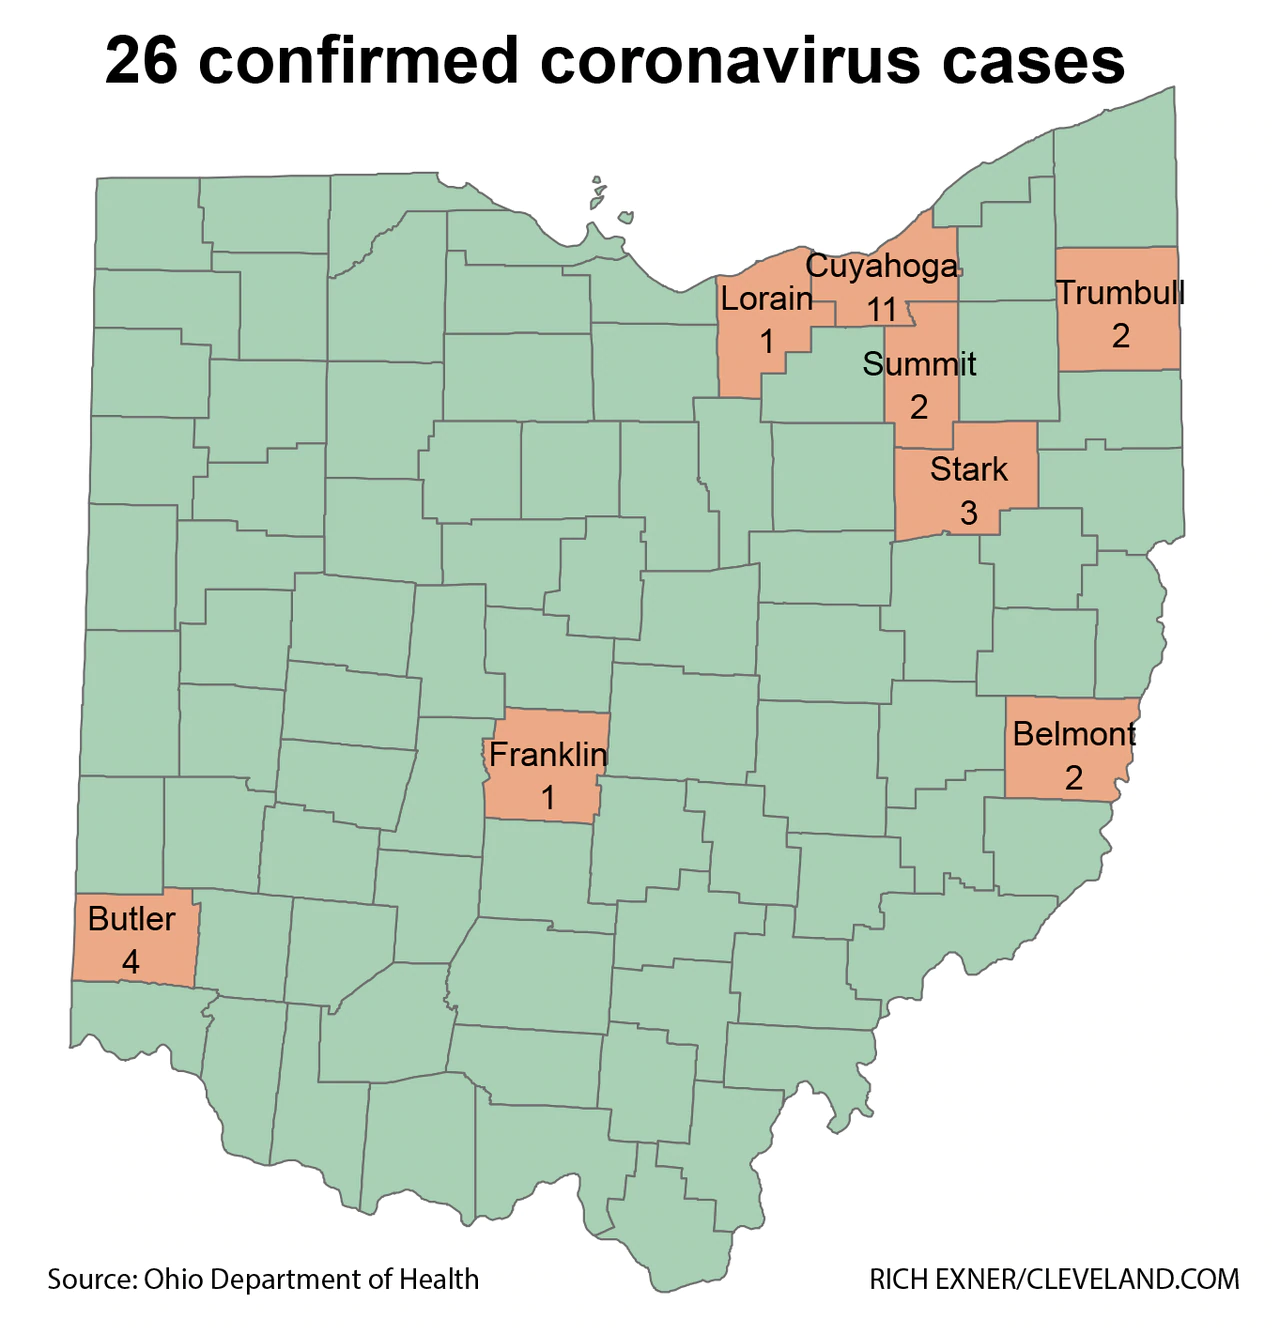 Summit County confirms 2nd novel coronavirus case was likely community-spread